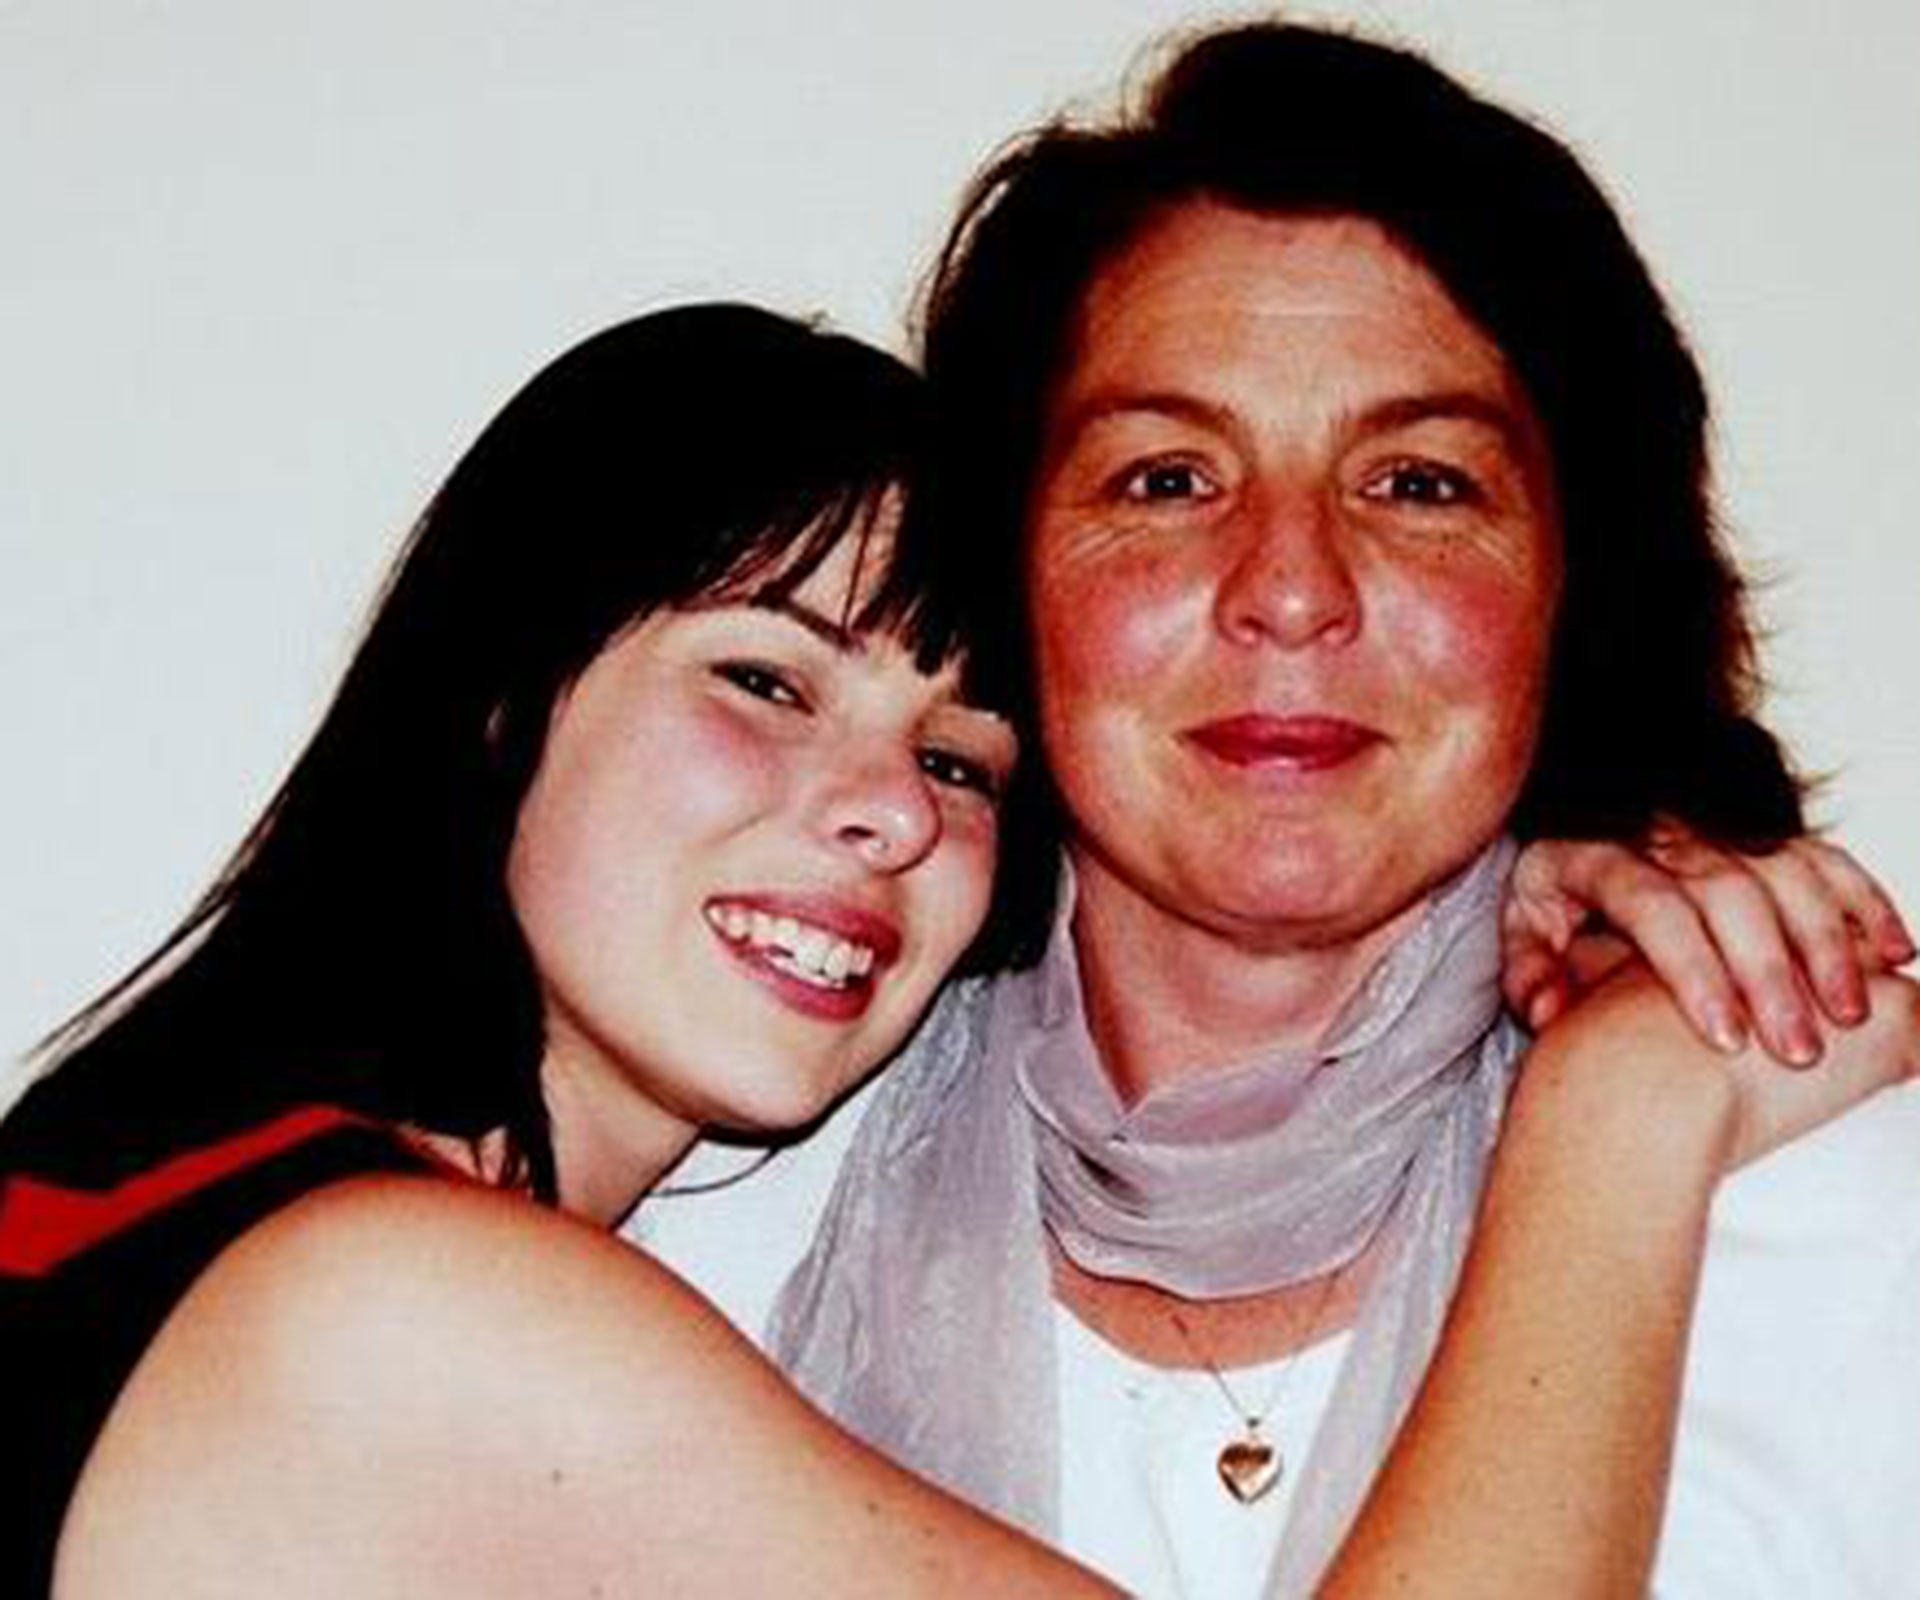 My mum vanished without a trace